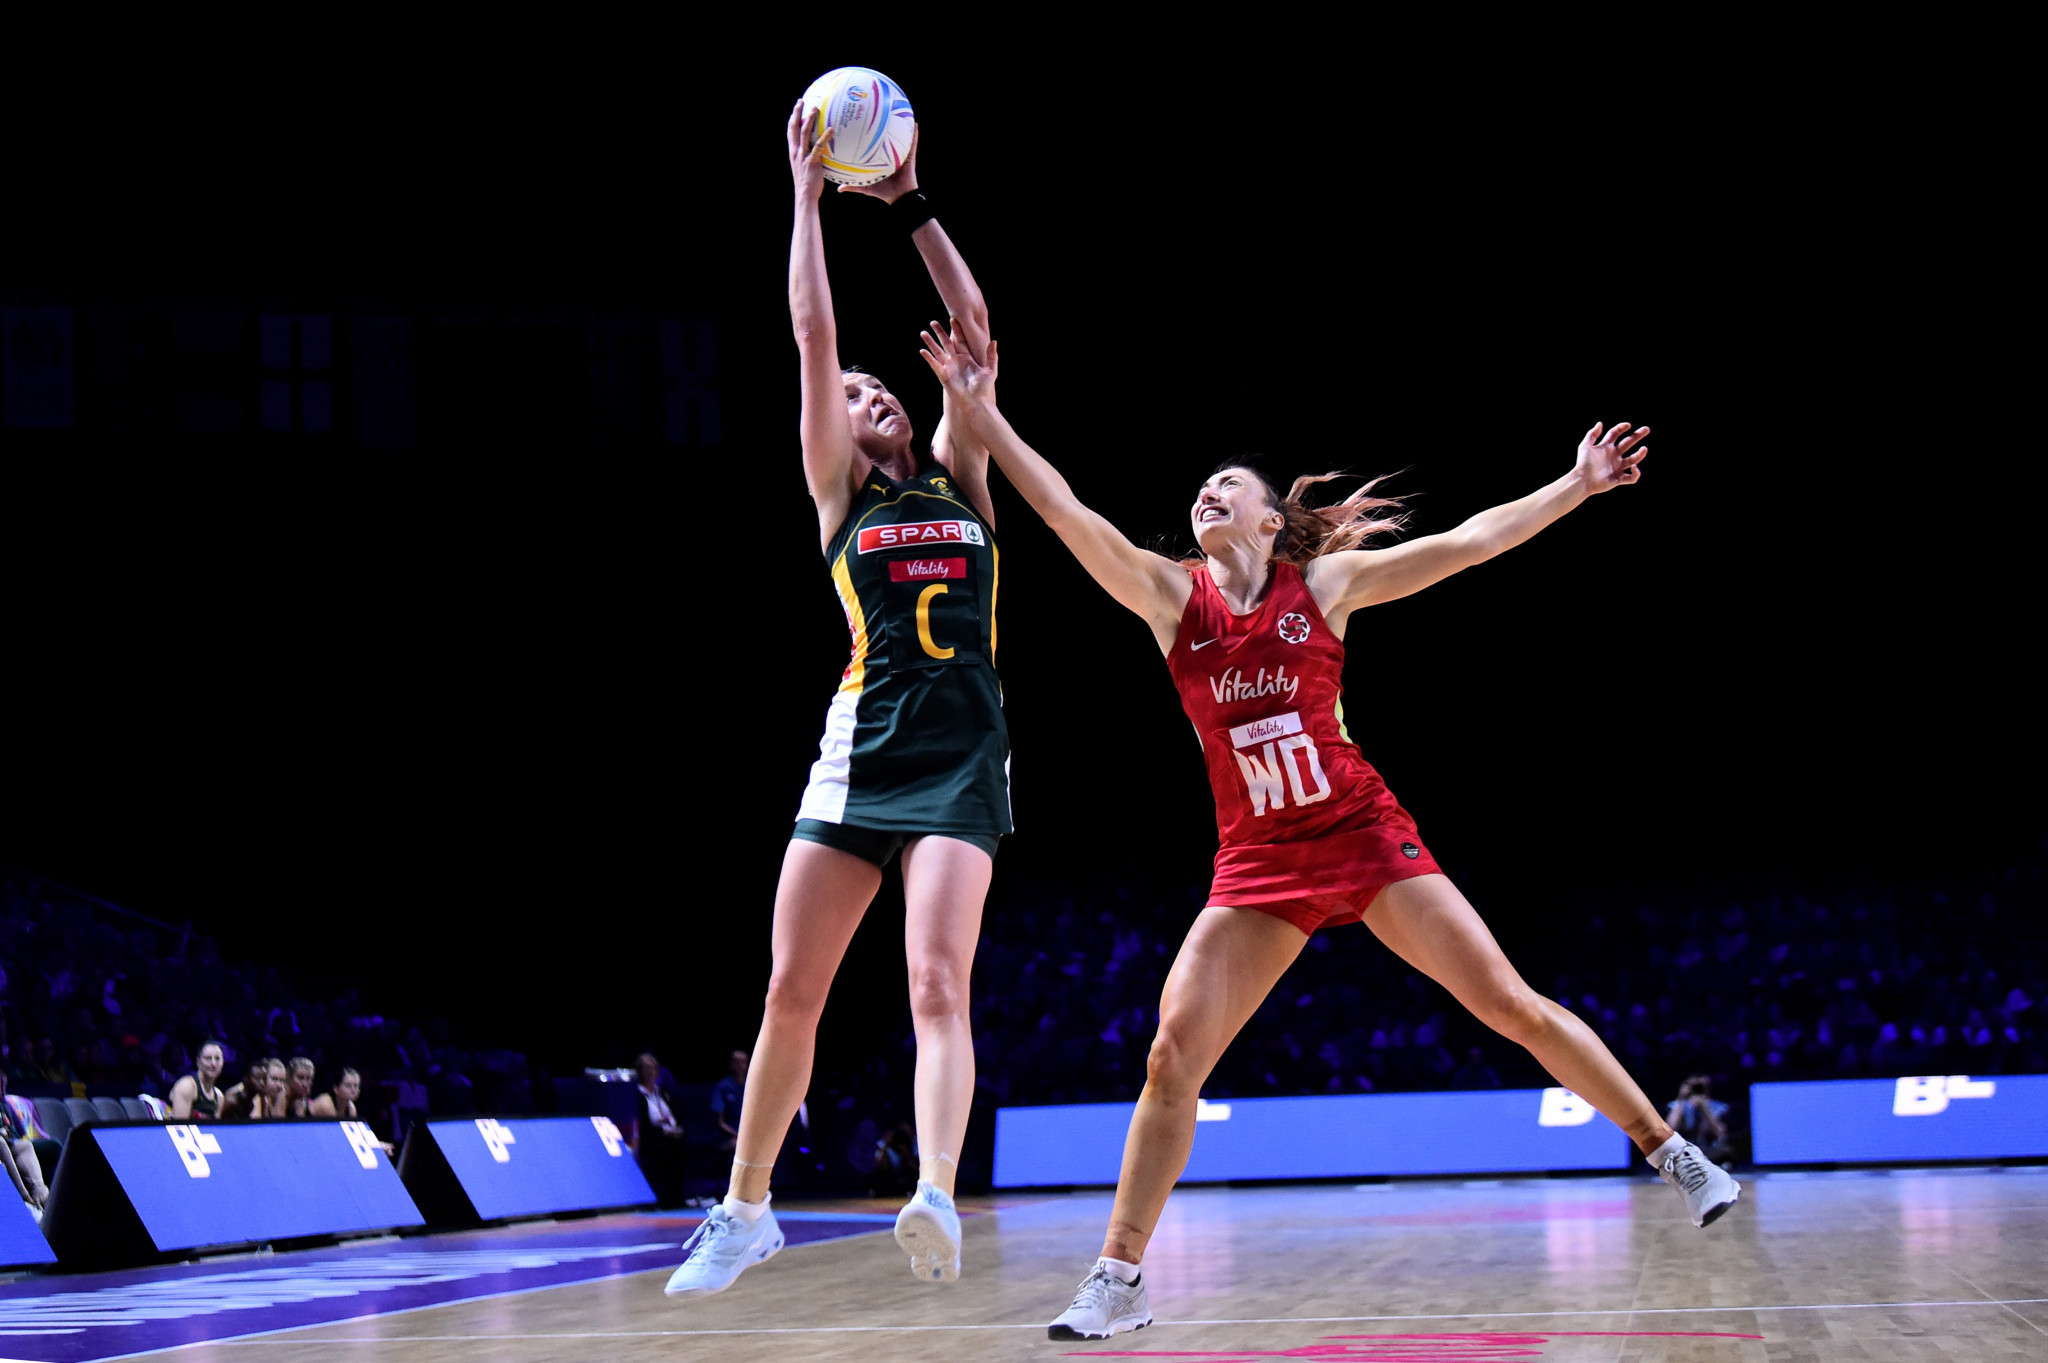 South Africa is to be the first African nation to stage the Netball World Cup ©Getty Images